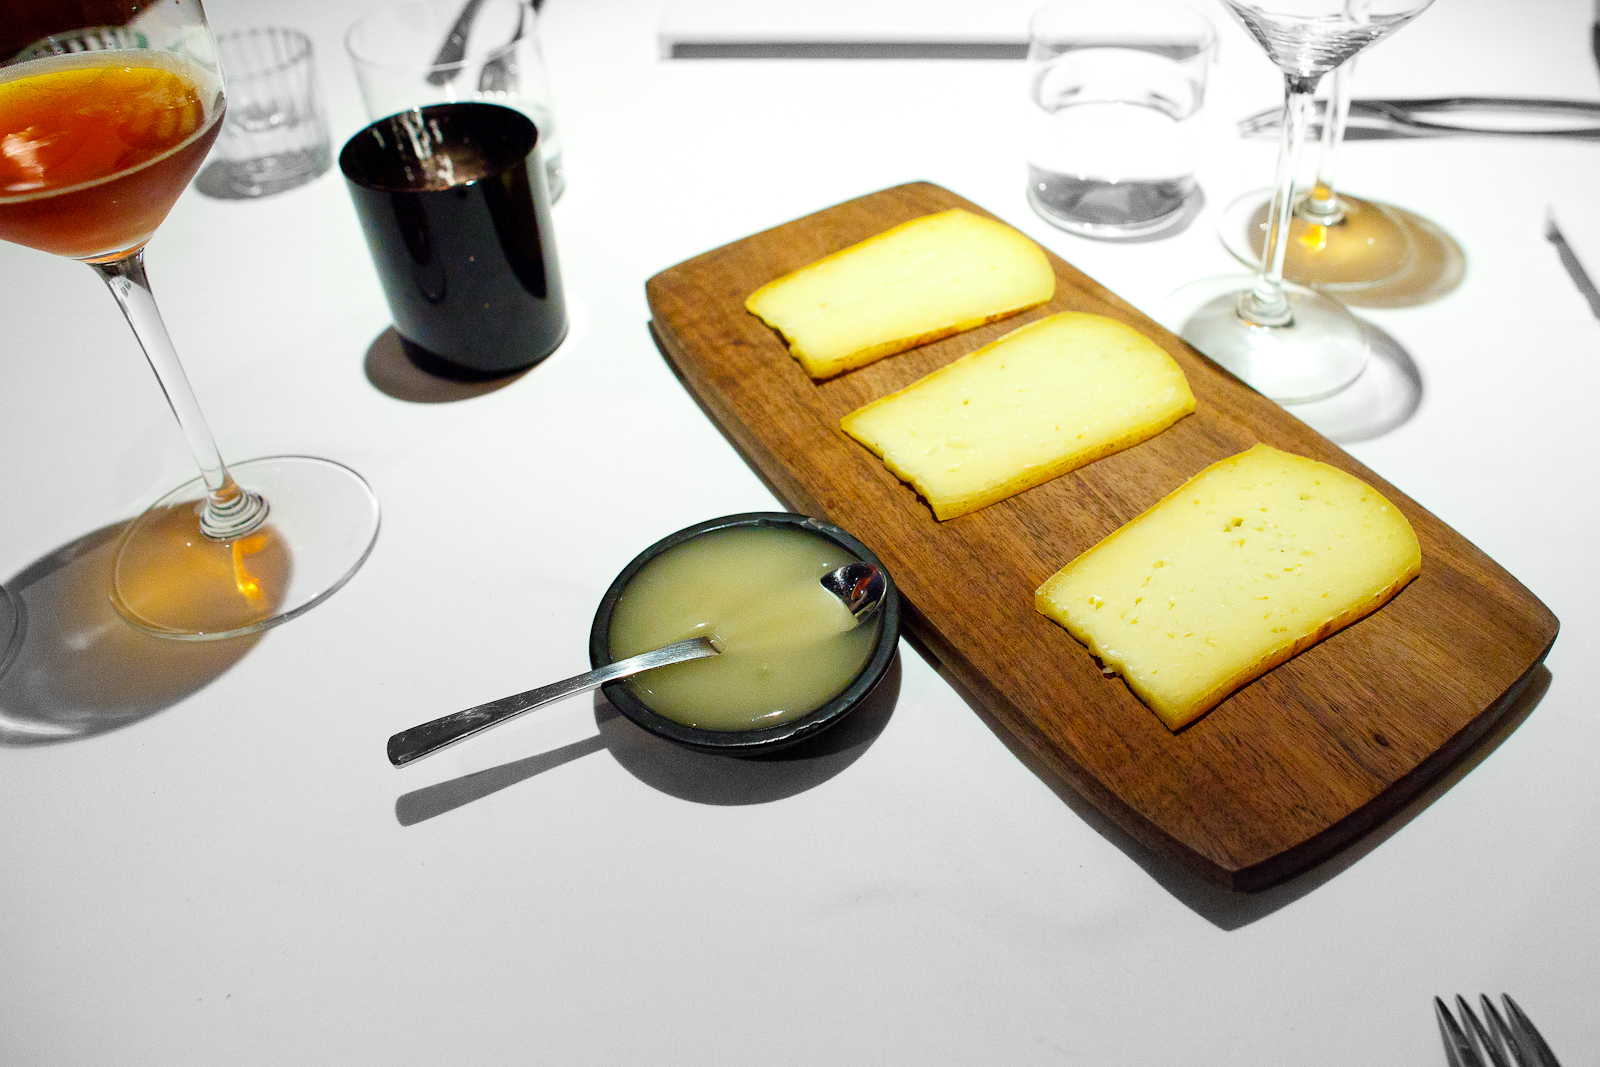 6th Course: Panela cheese aged for 1 year, local honey